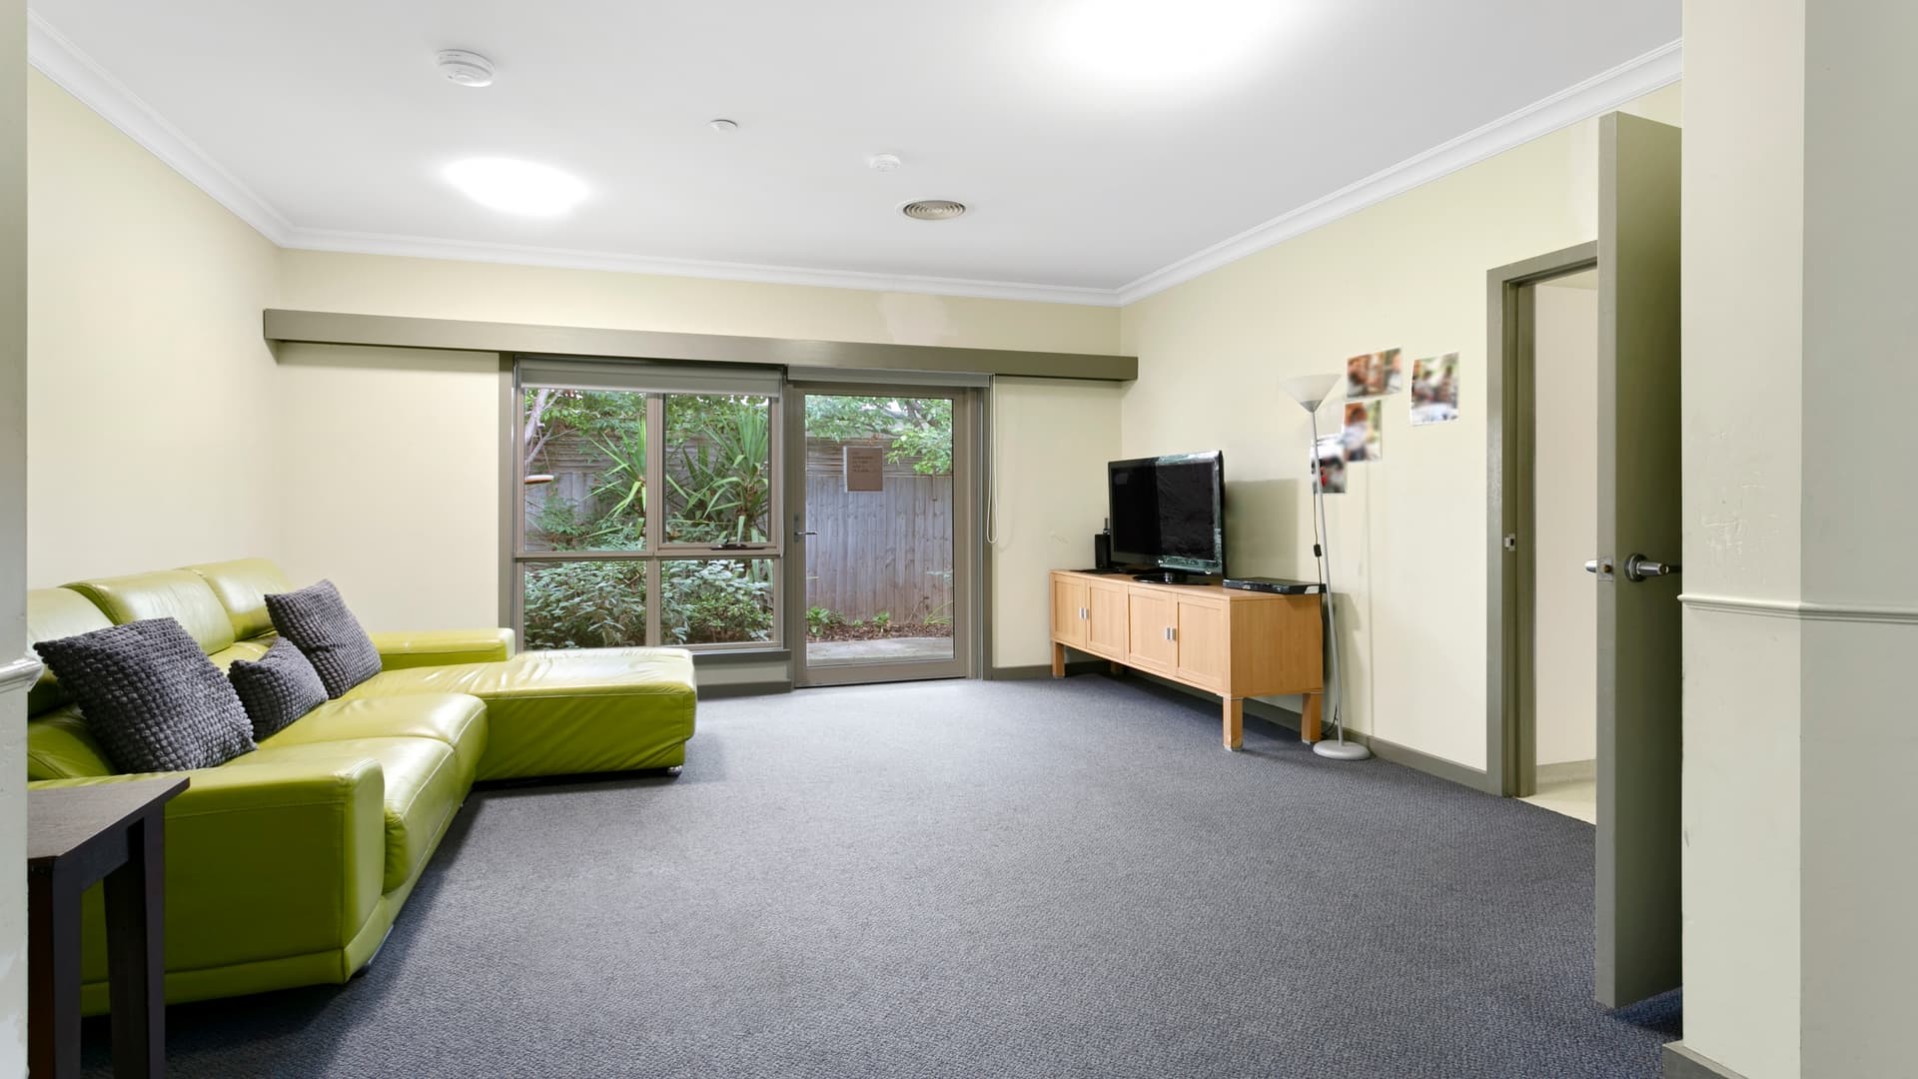 Second living space with grey carpet, three seater green lounge facing a television on a wooden cabinet.  There is a sliding door leading to outdoors.